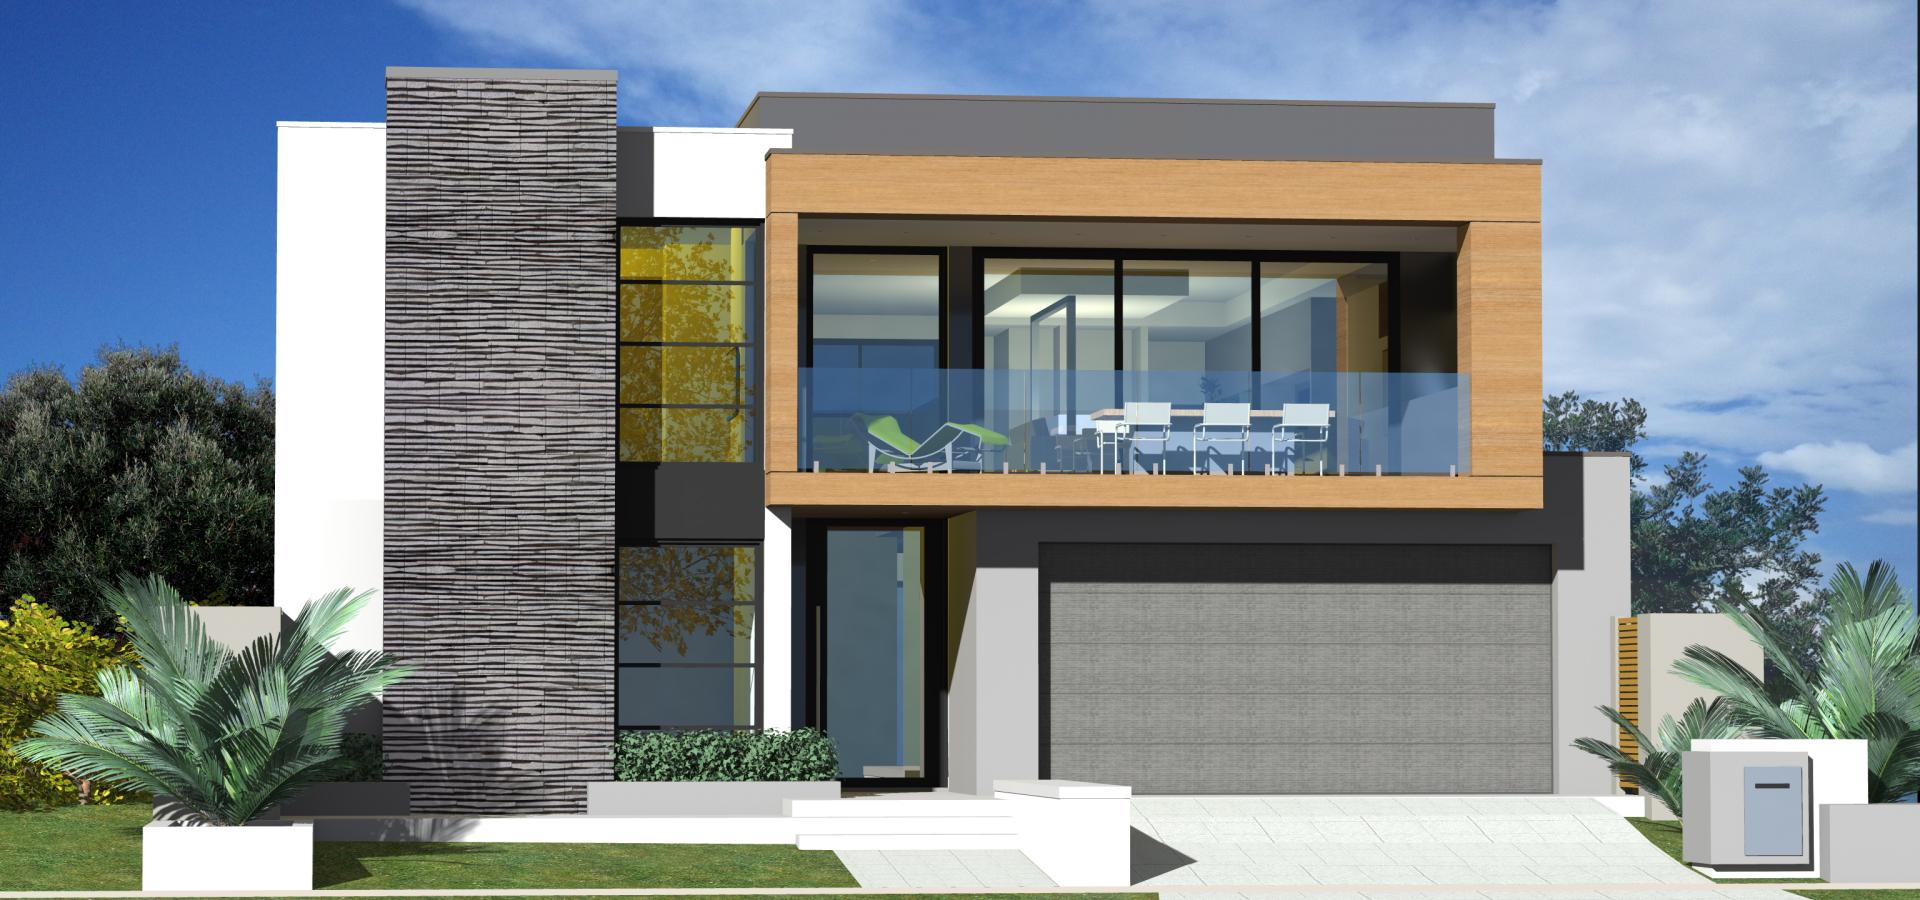 Reverse Living Two Storey Home Design With Front Balcony